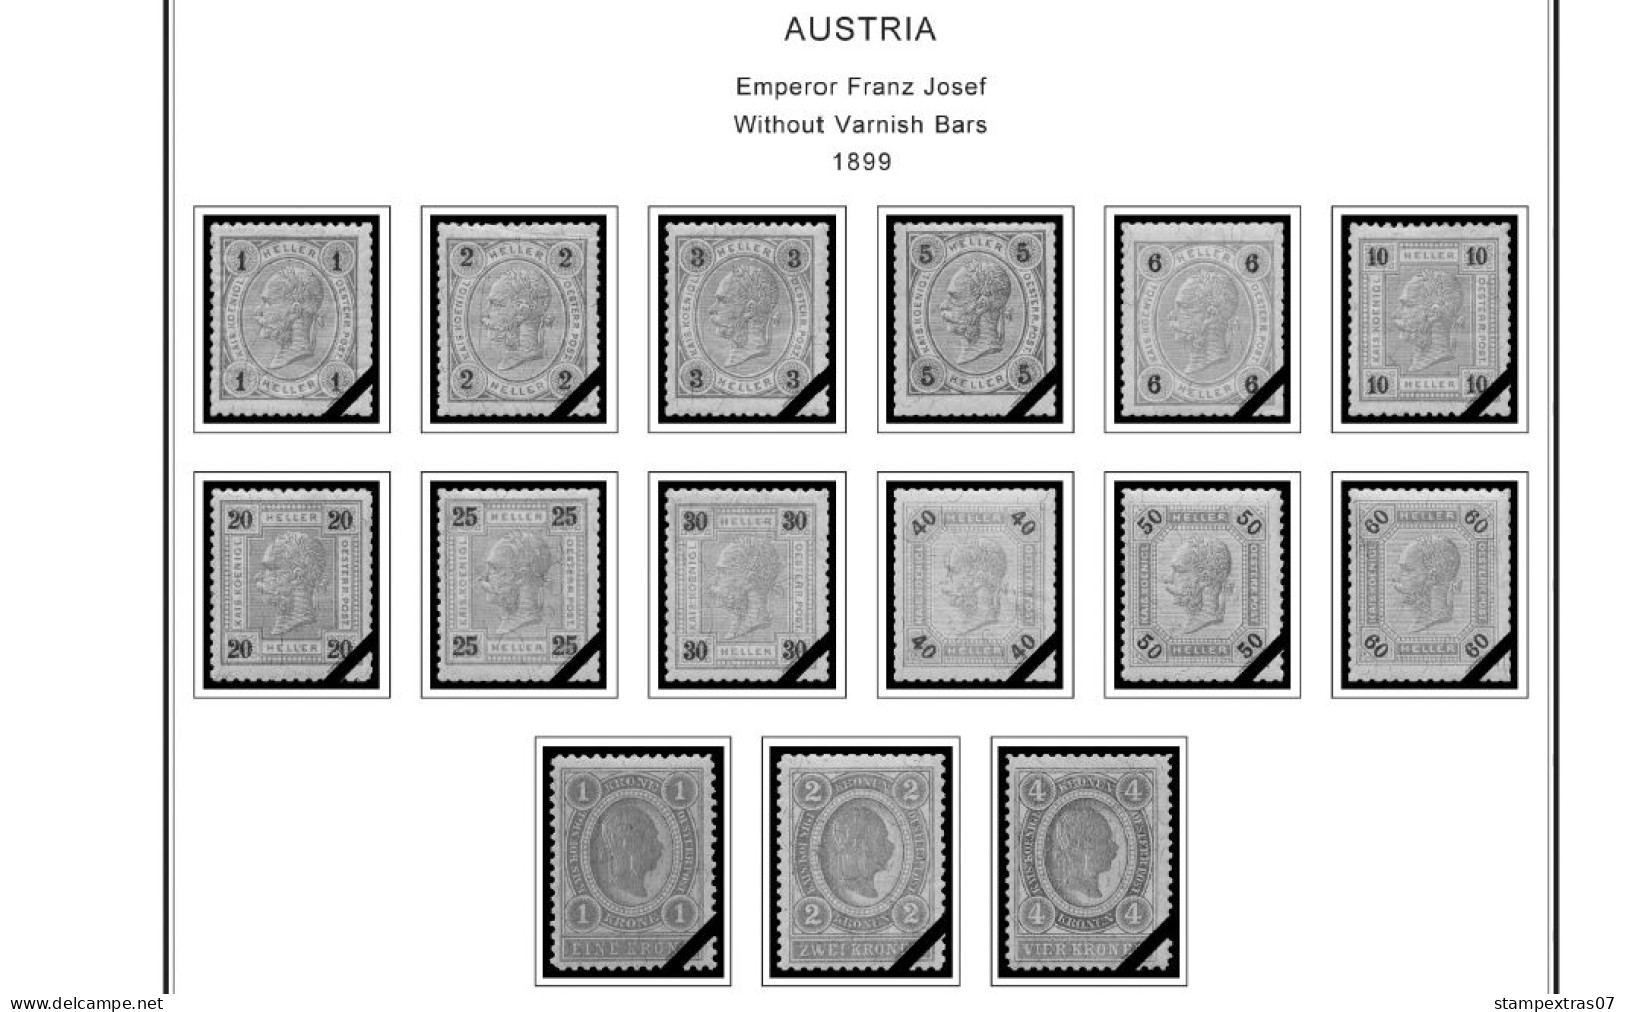 AUSTRIA 1850-2010 + 2011-2020 STAMP ALBUM PAGES (417 B&w Illustrated Pages) - Englisch